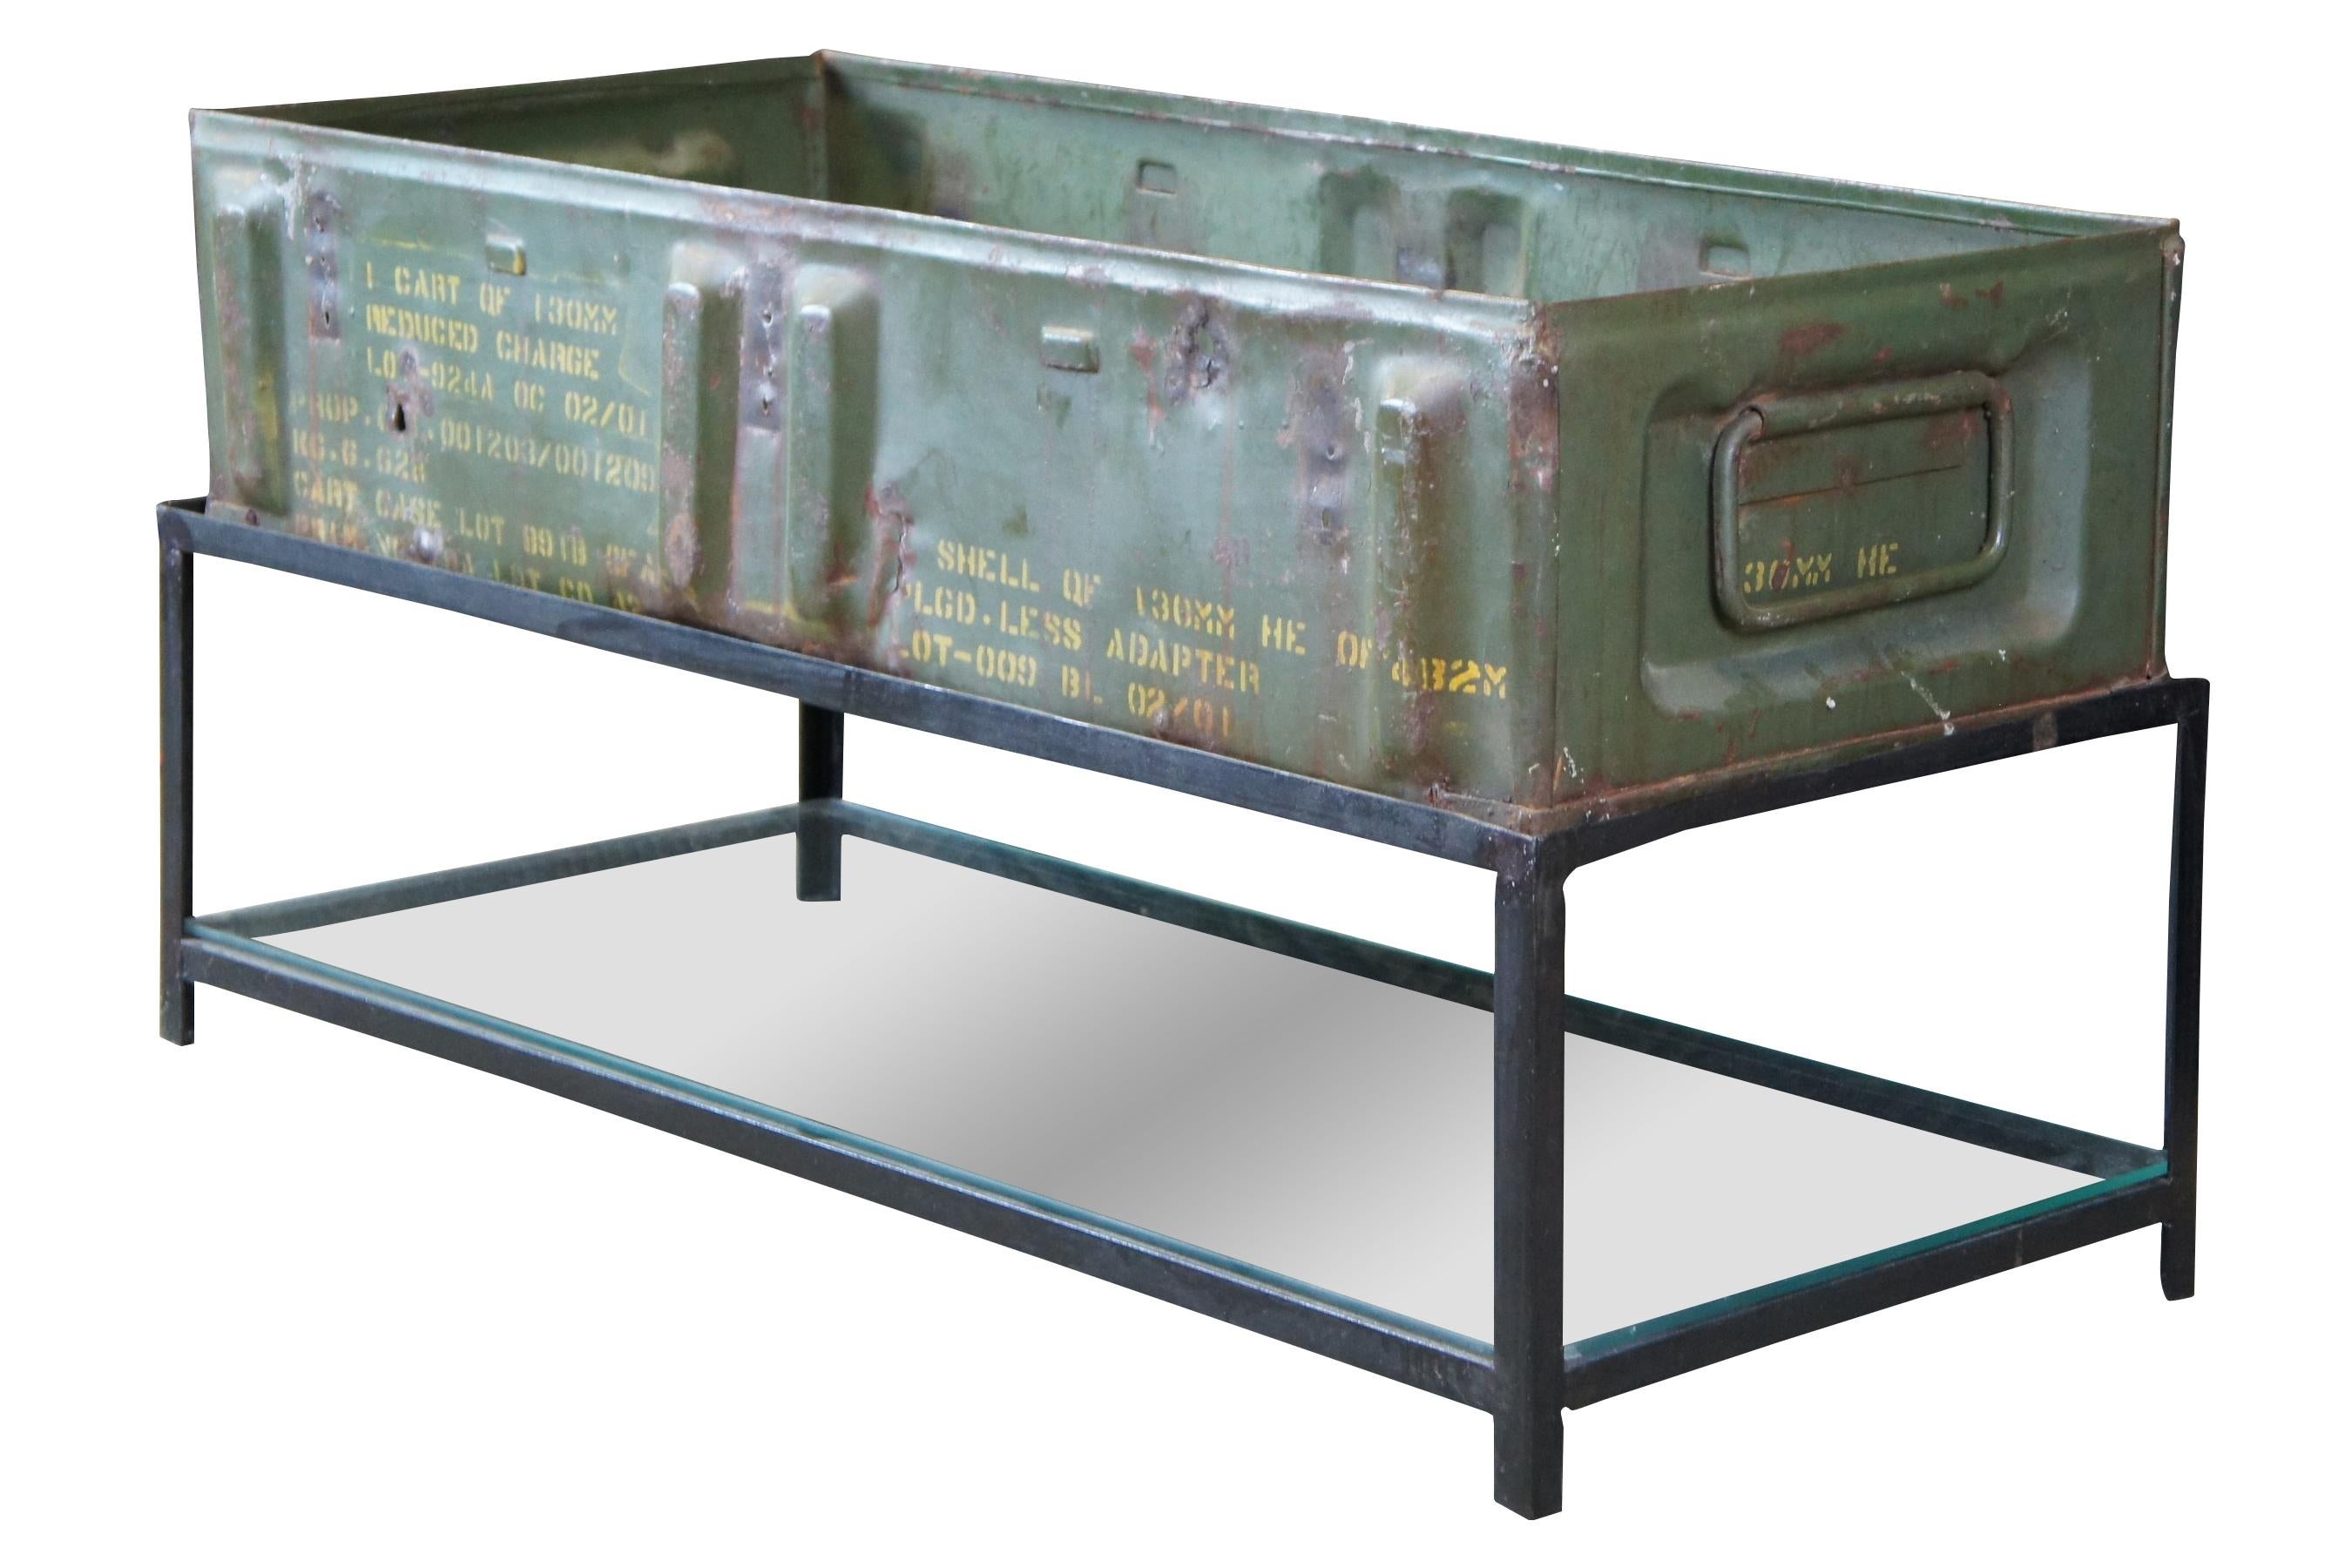 A steel ammo box on handmade steel stand with glass shelve. A versatile piece that can be used for storage or as a coffee table. Add a glass top to use as a console or sofa table.

Measures: 38